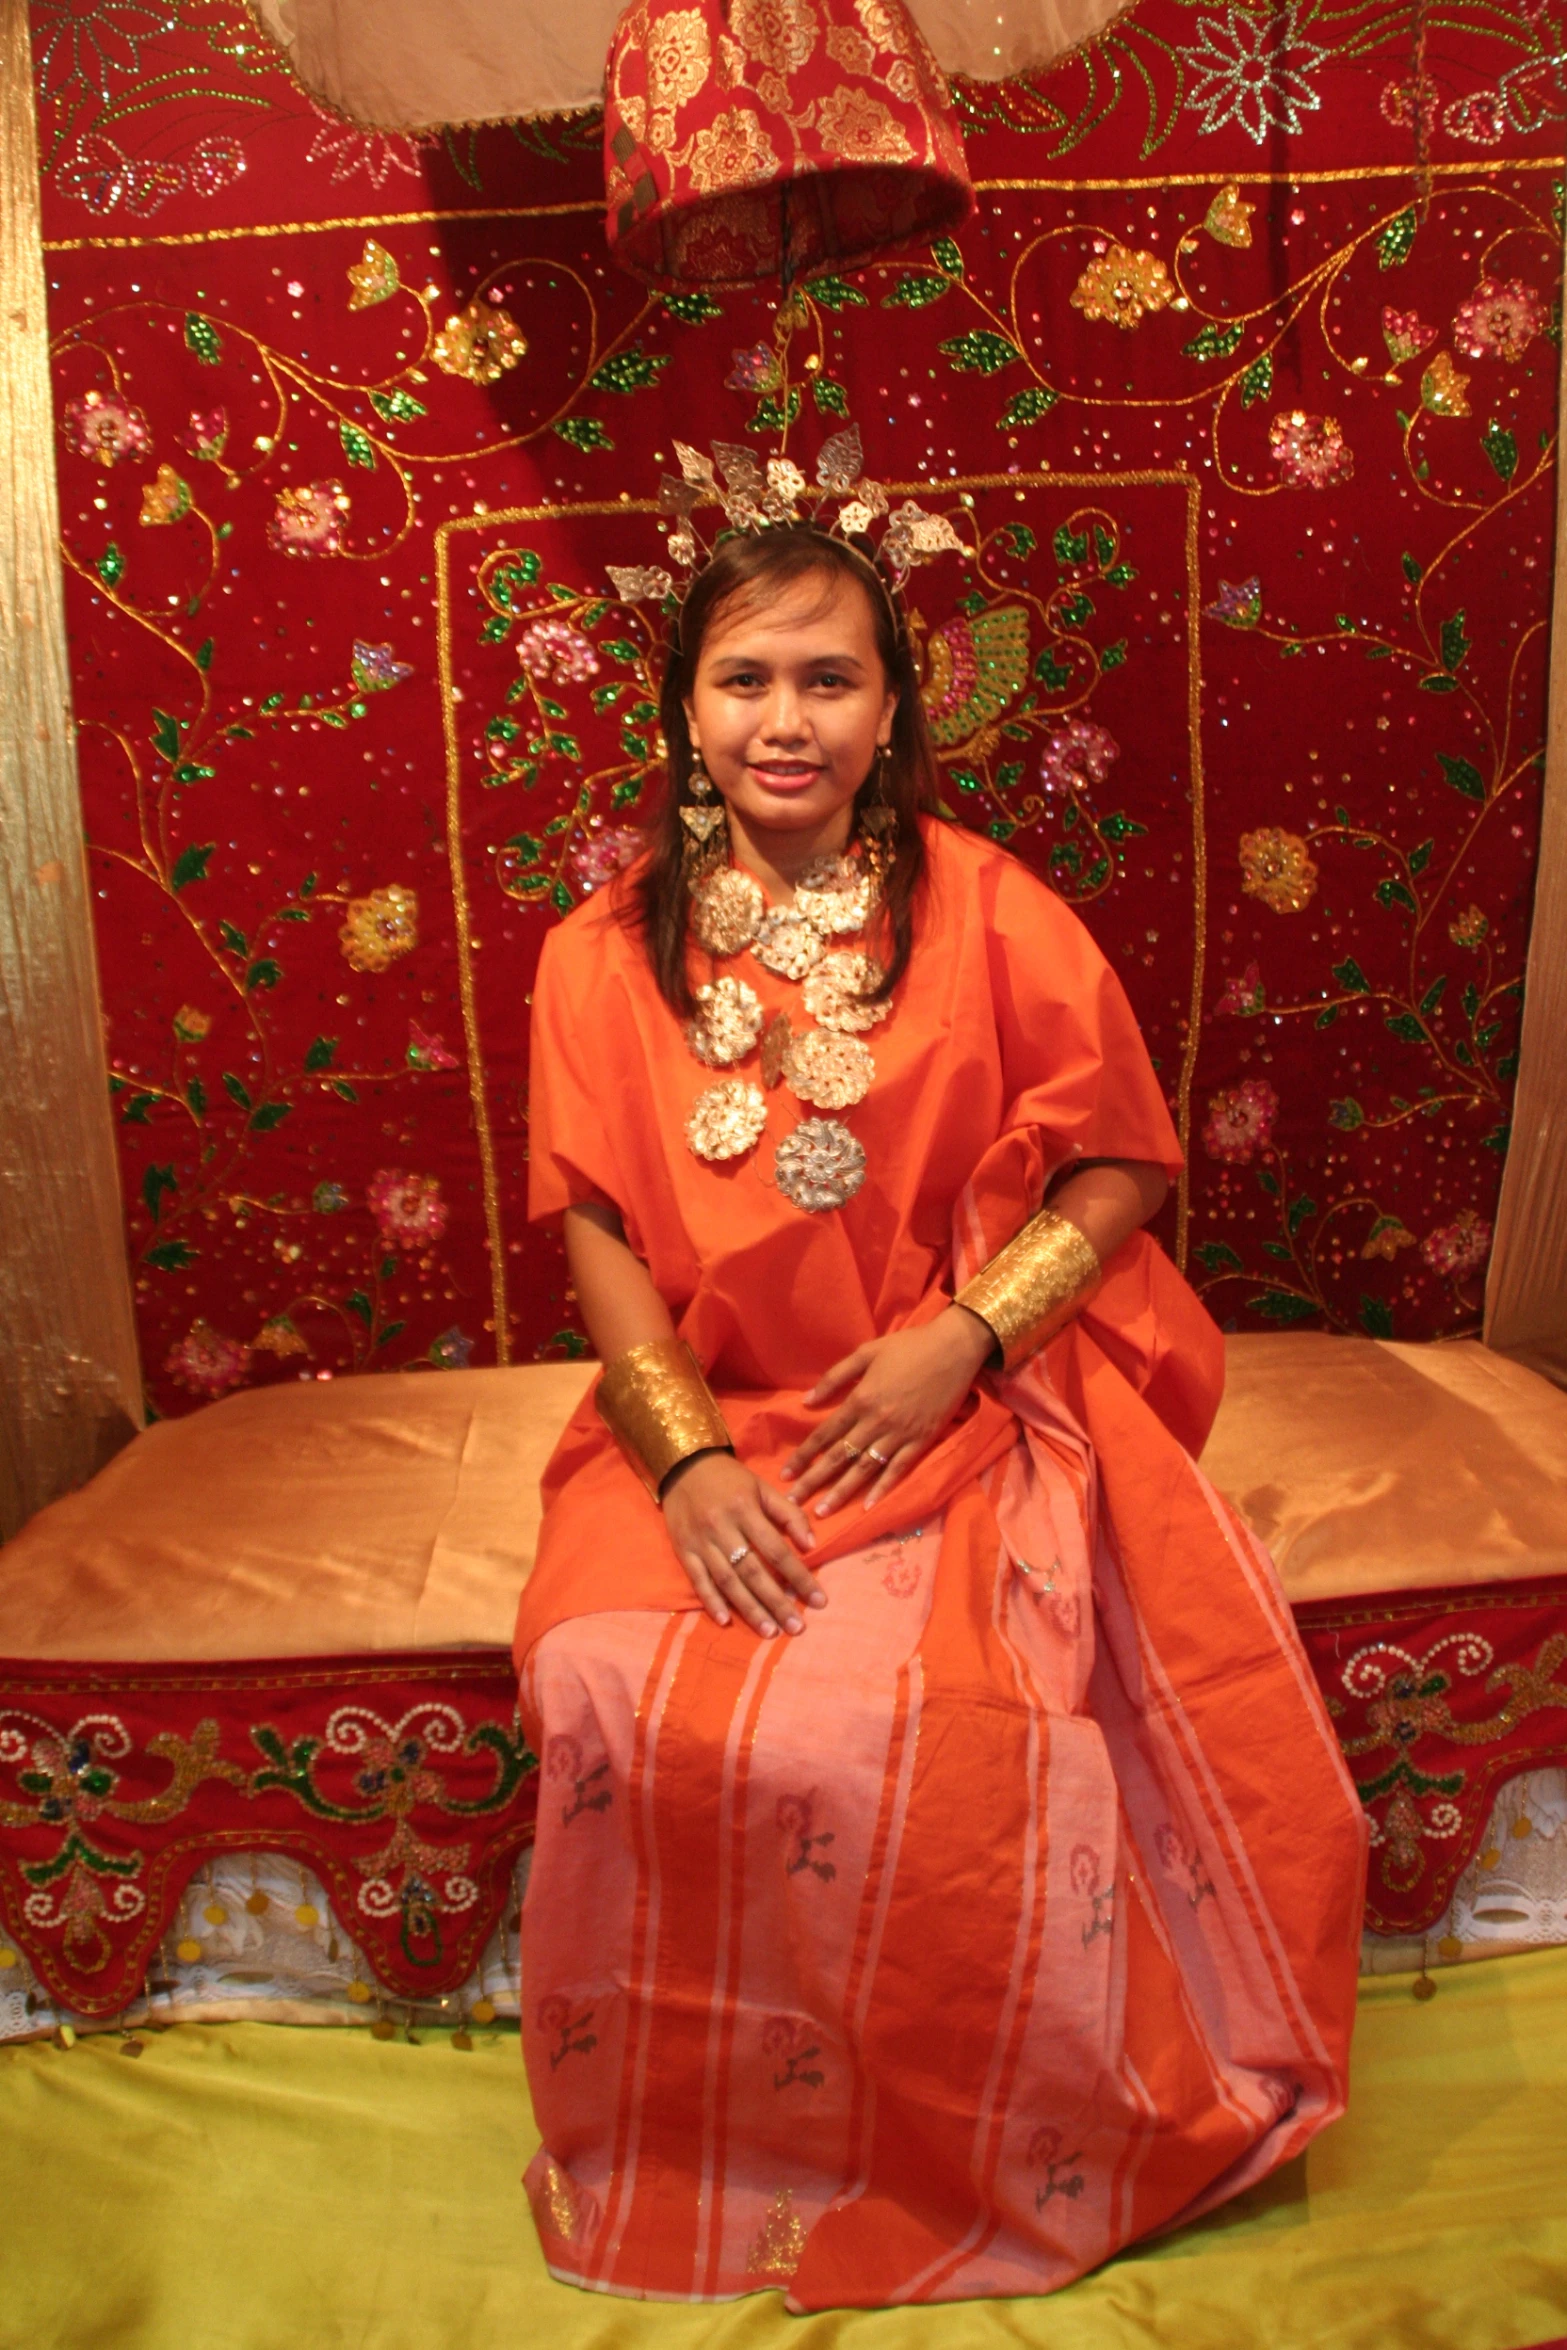 a woman sitting on a bed with jewelry on her head